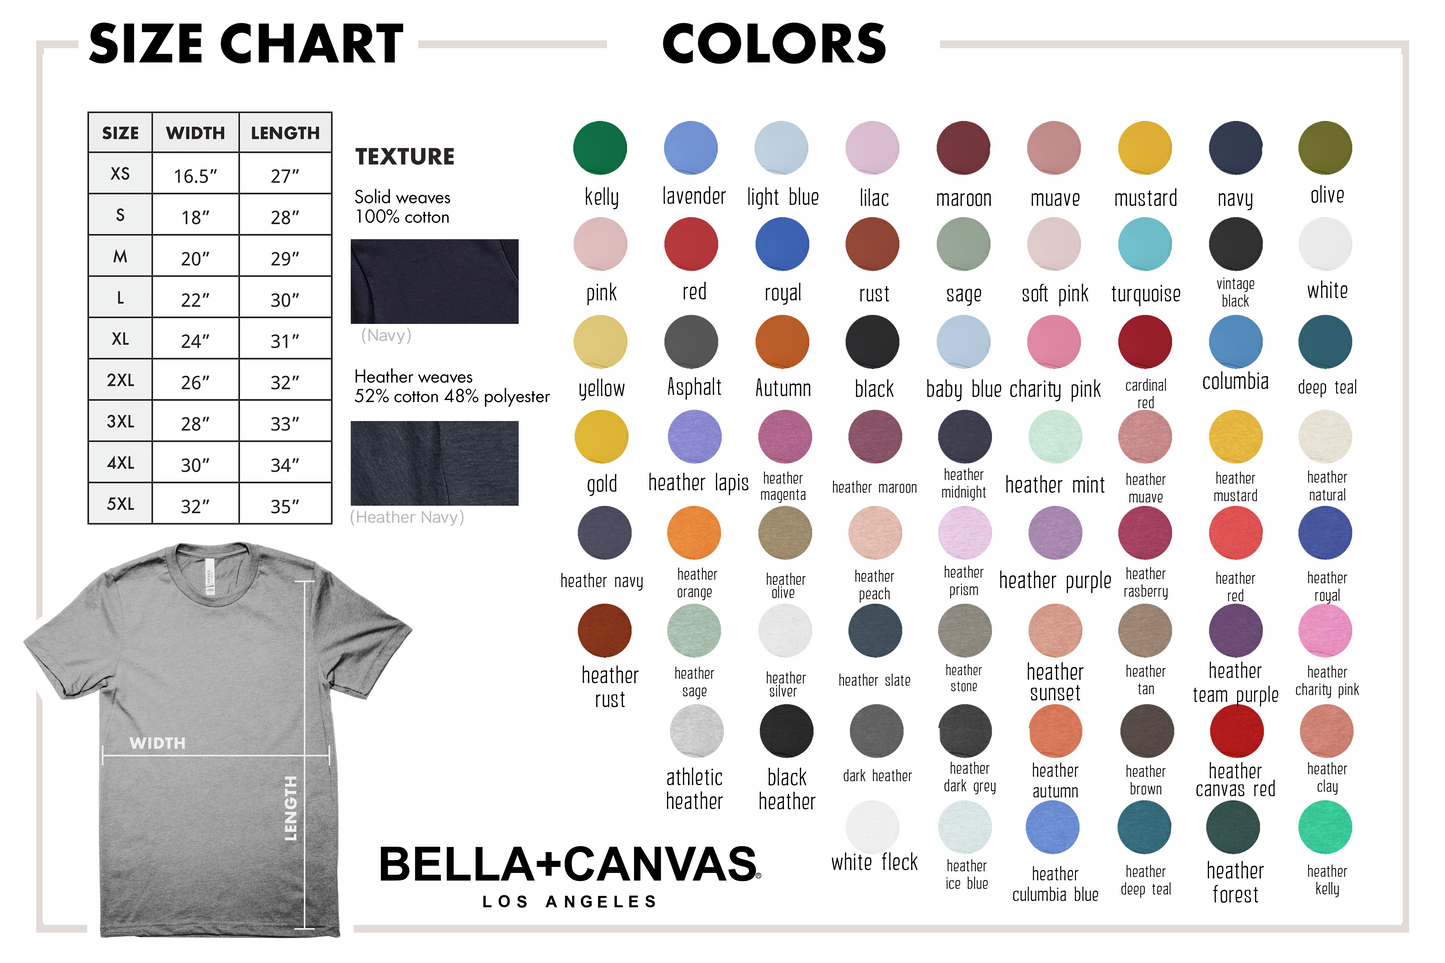 Connecticut Local Tshirt - Bella Canvas (lots of color choices)